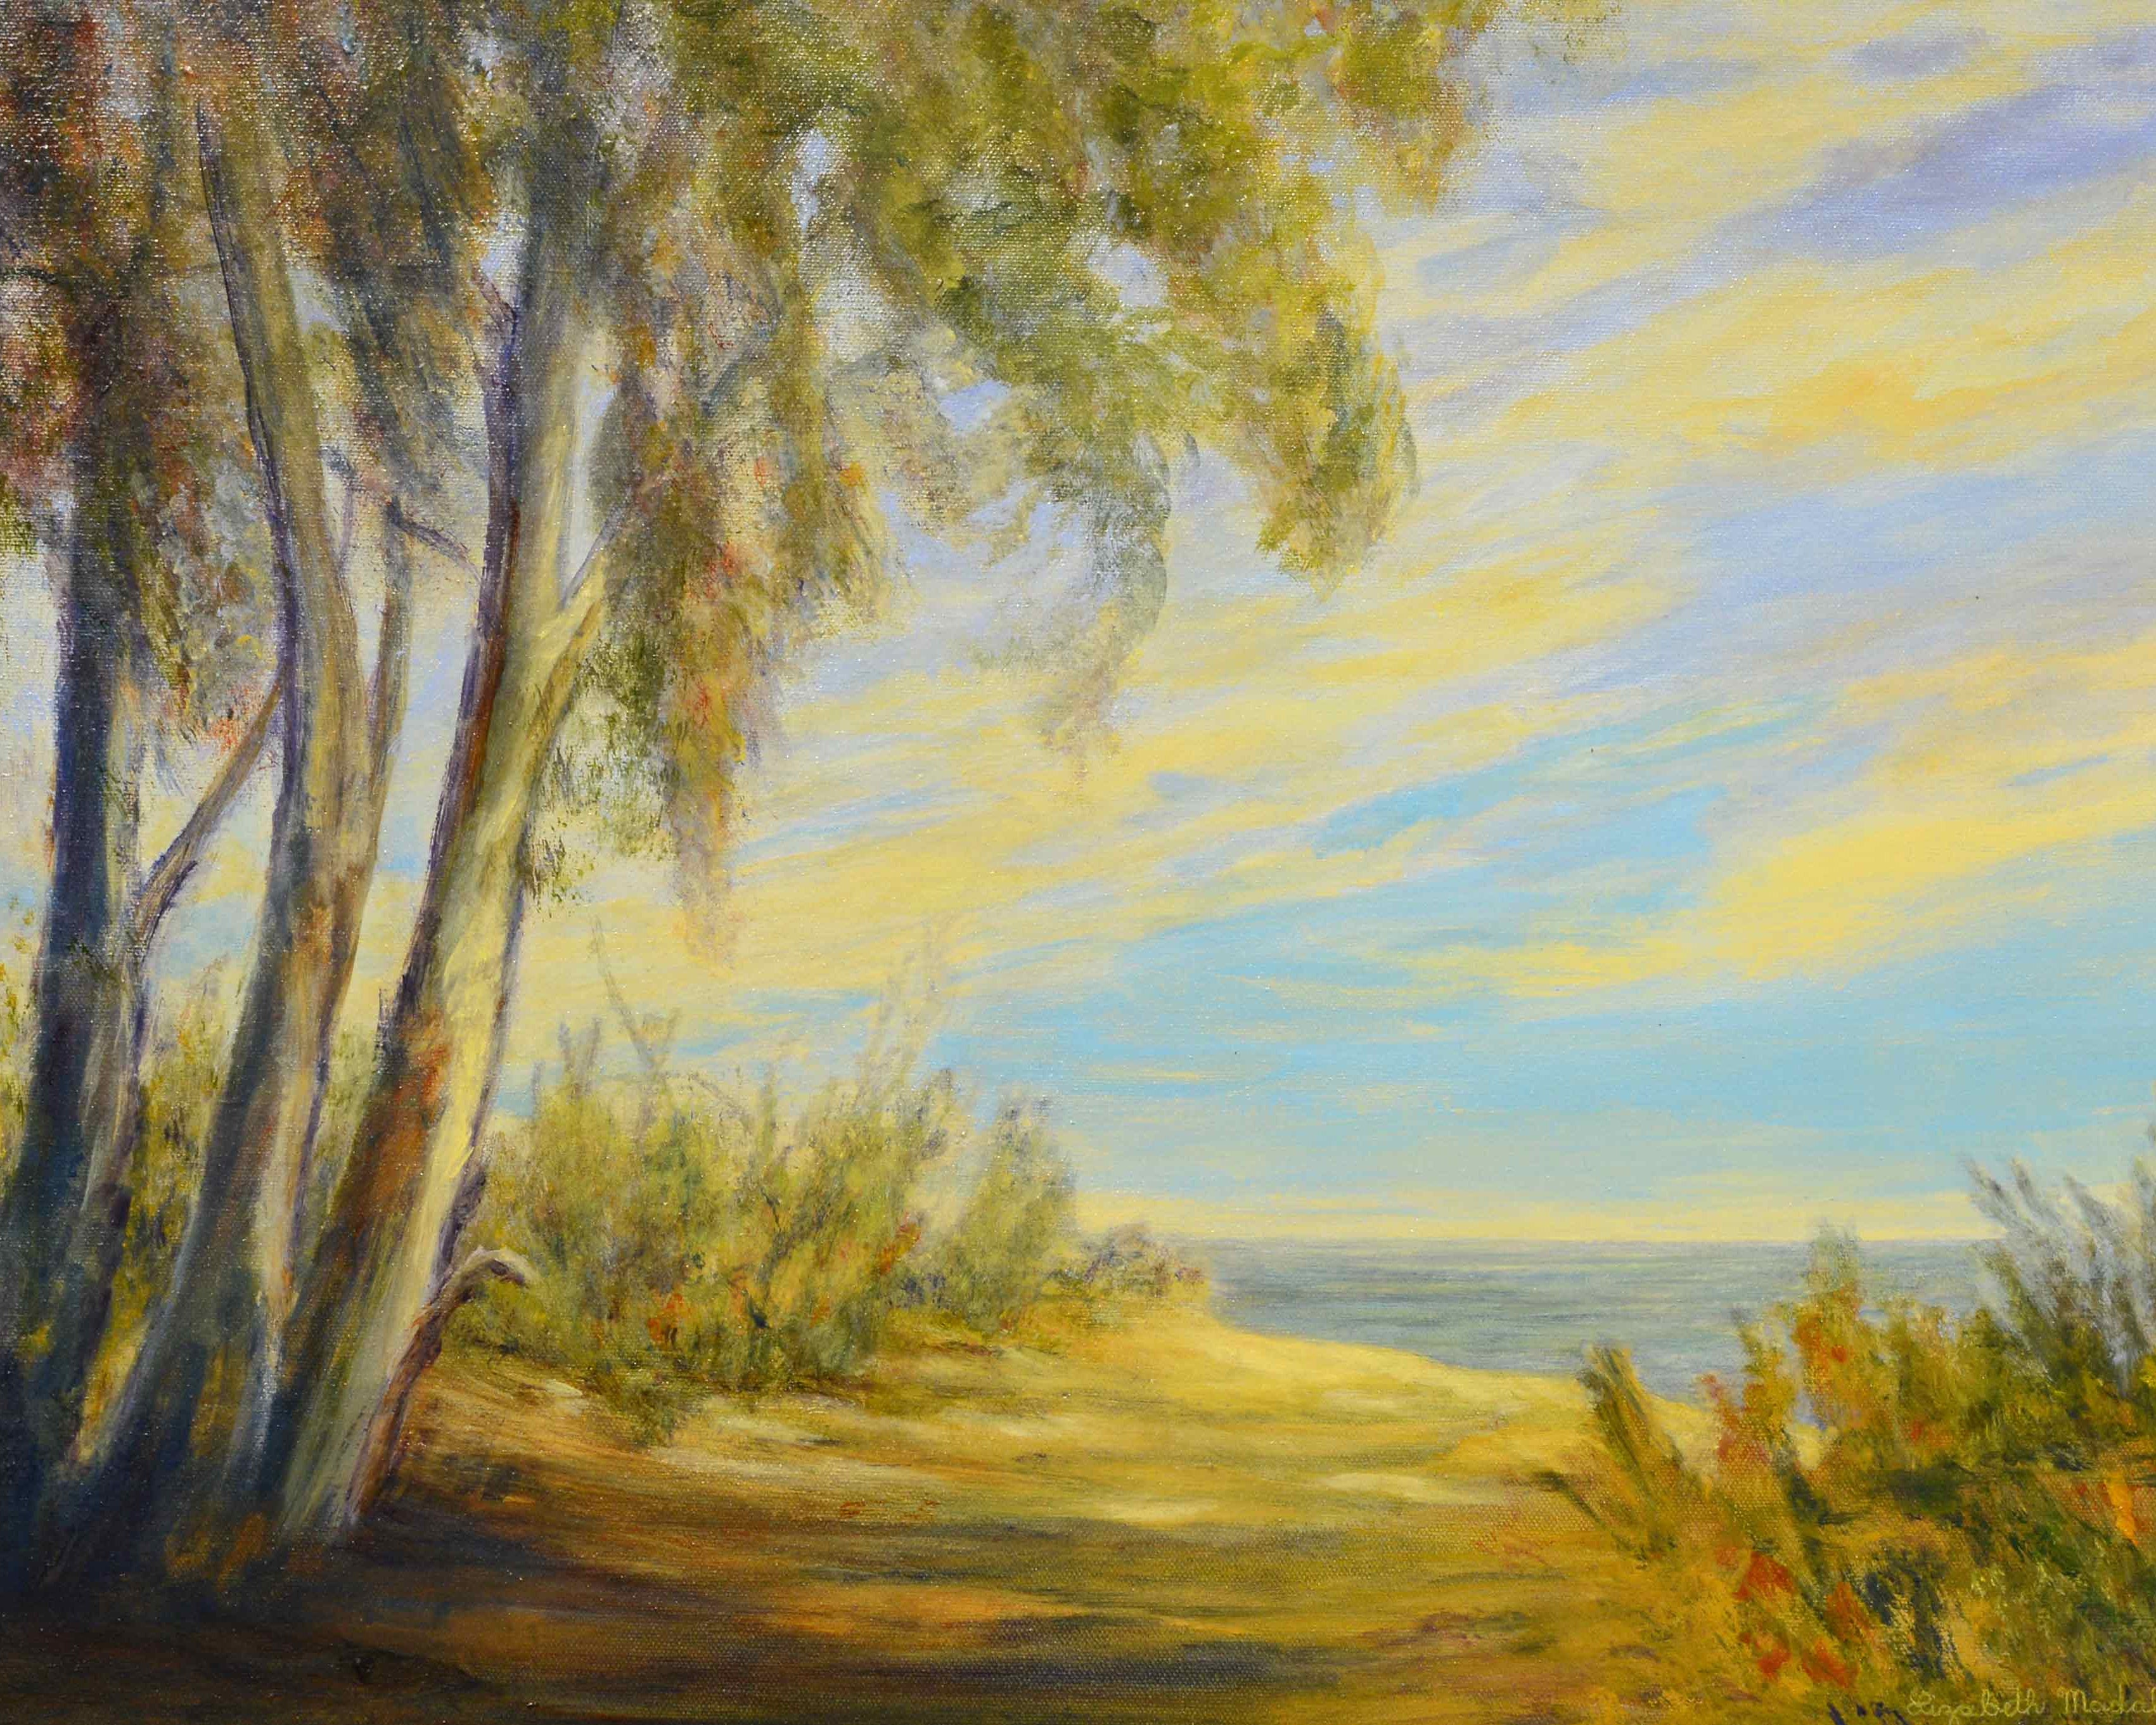 A painting of eucalyptus trees beside the ocean.